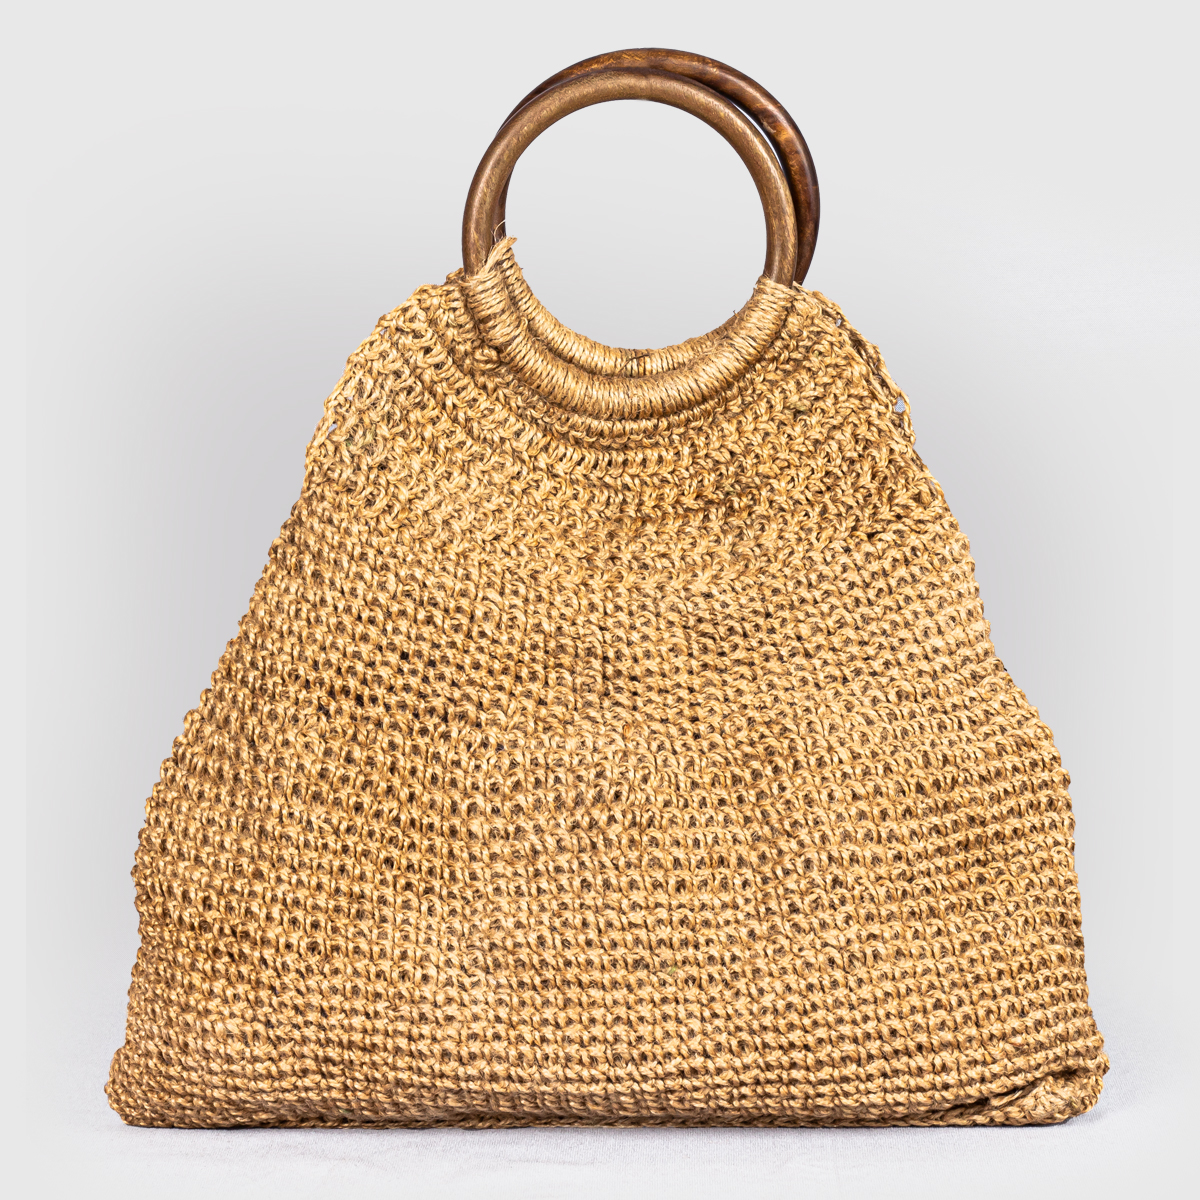 Jute Fashion Bag With Wooden Handle for Women - Bags Basket